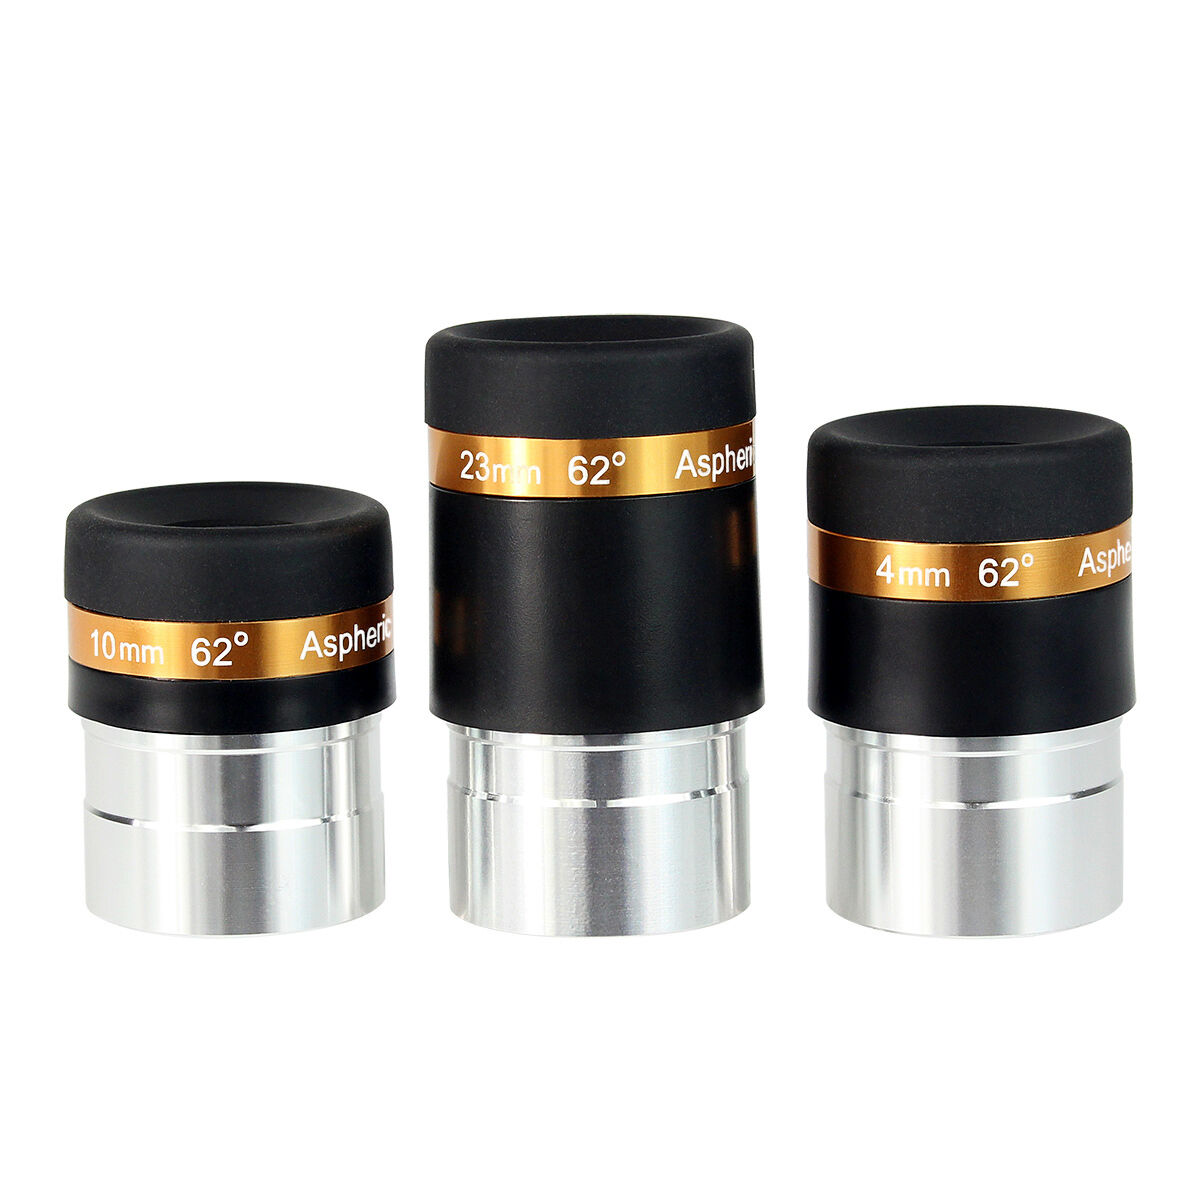 Svbony 4mm/10mm/23mm Angle 62°aspheric Eyepieces Hd Coated For 1.25" Astronomic